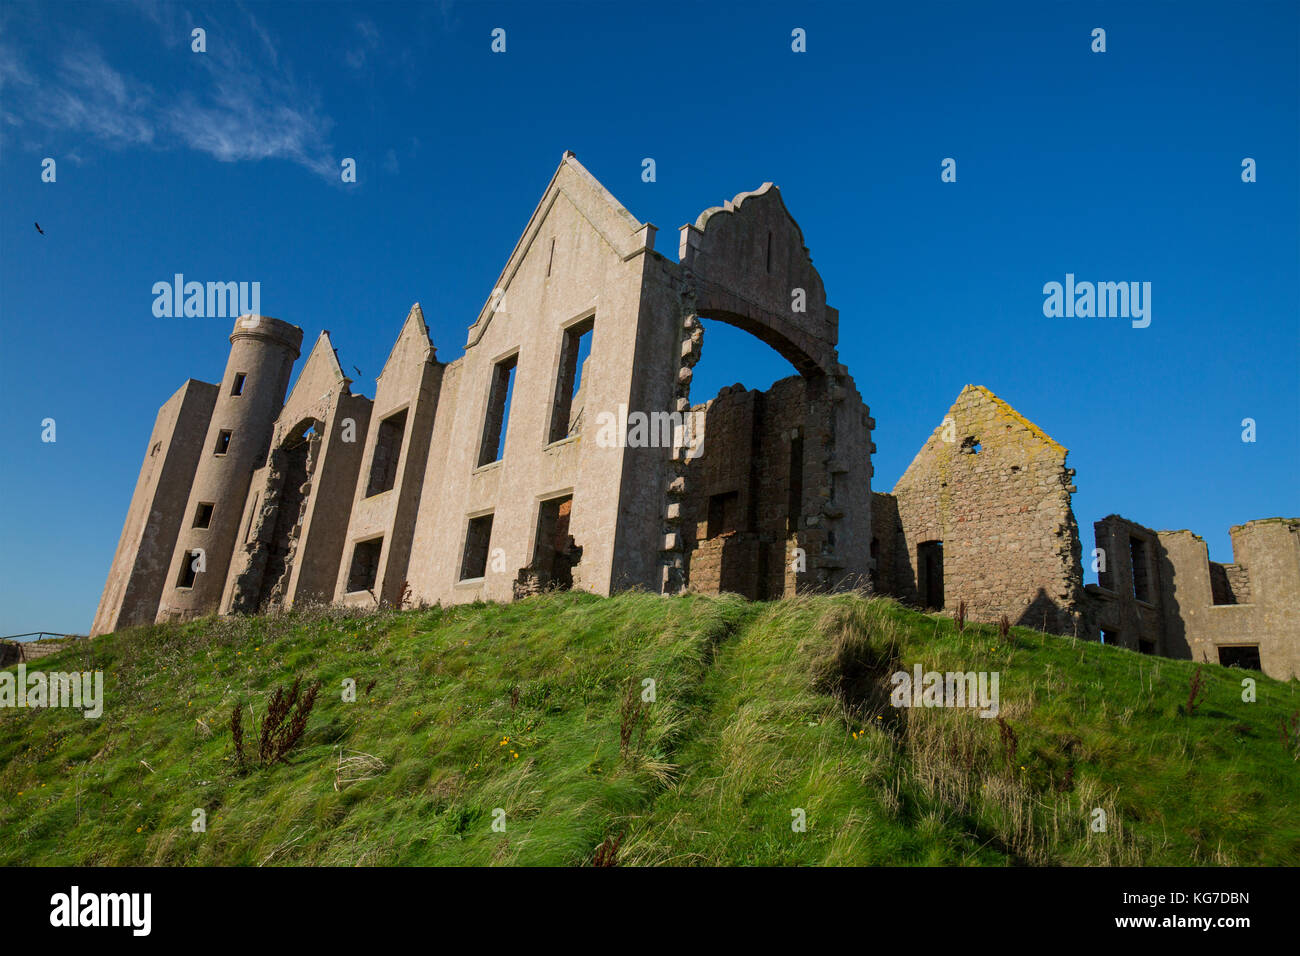 The cliff top ruins of Slains Castle on the North Sea coast in Aberdeenshire, Scotland - allegedly the inspiration for Bram Stoker's novel 'Dracula'. Stock Photo